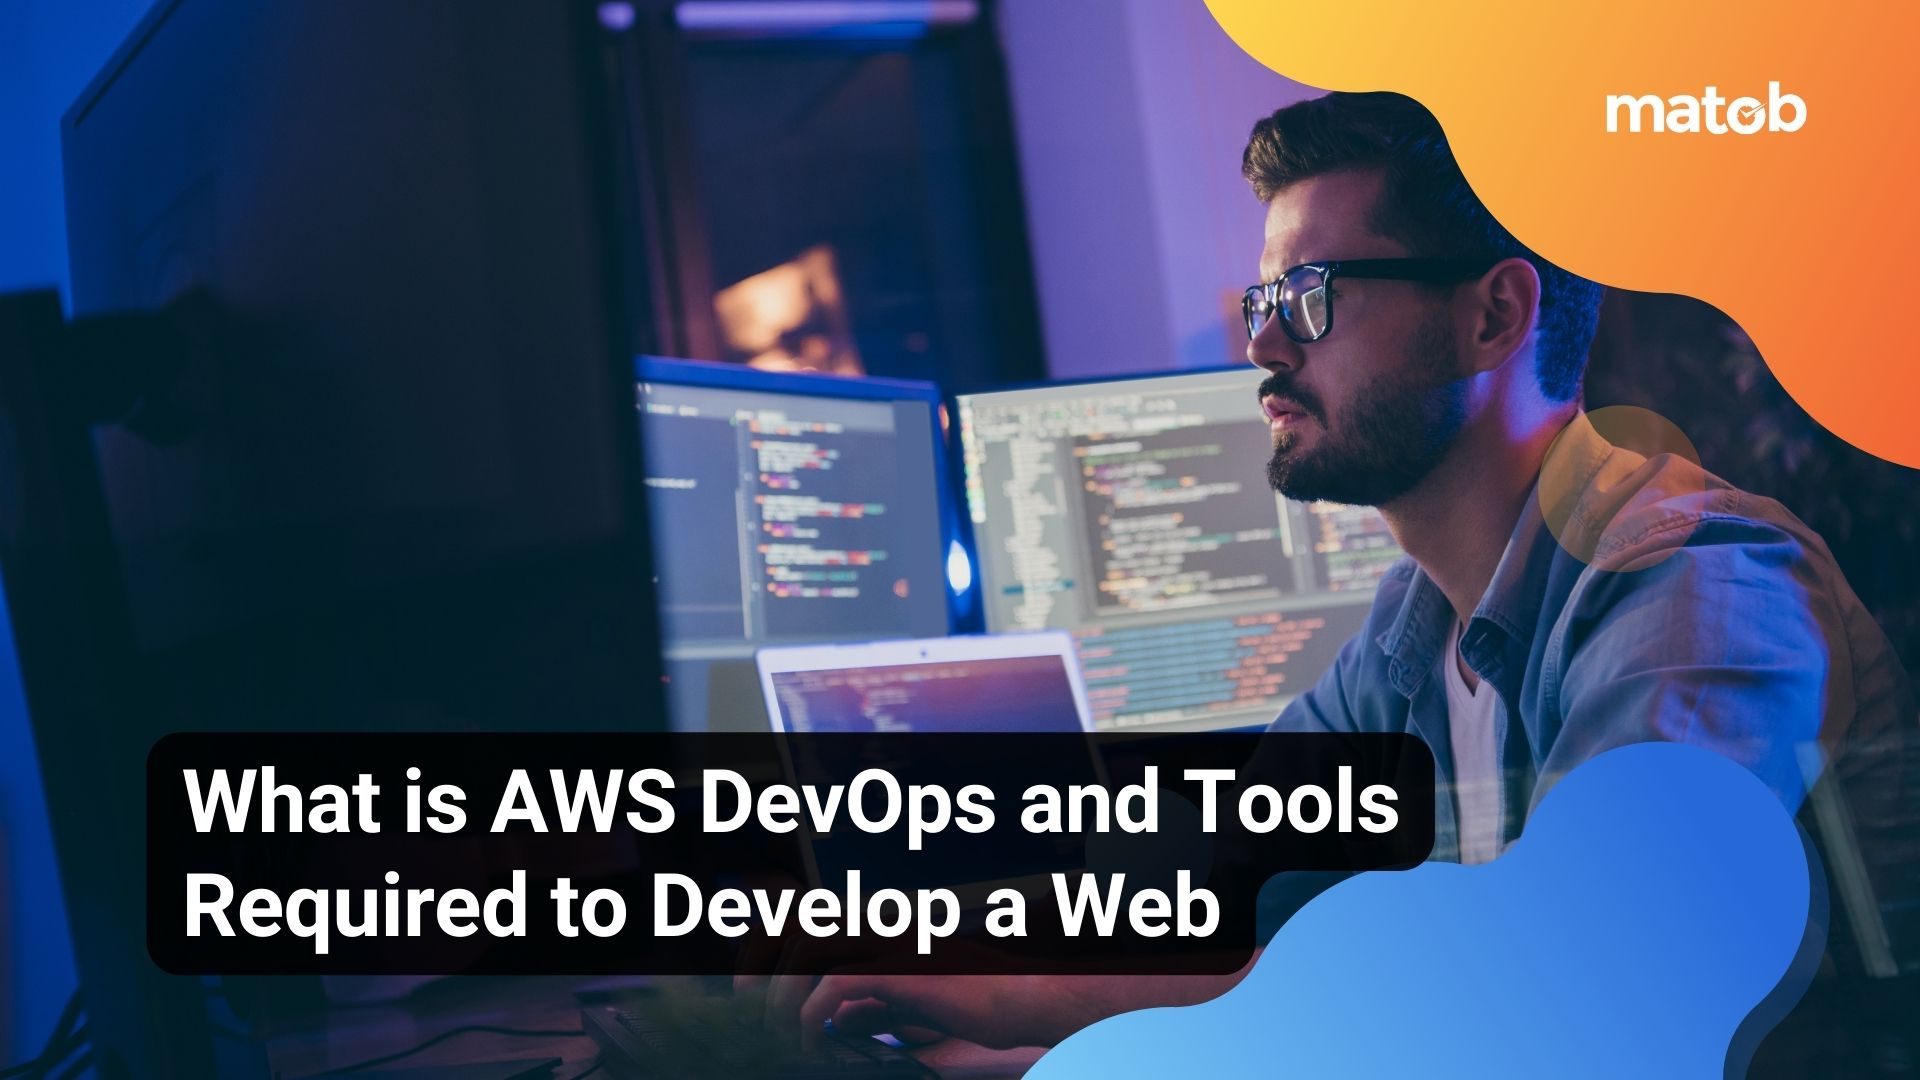 What is AWS DevOps and Tools Required to Develop a Web